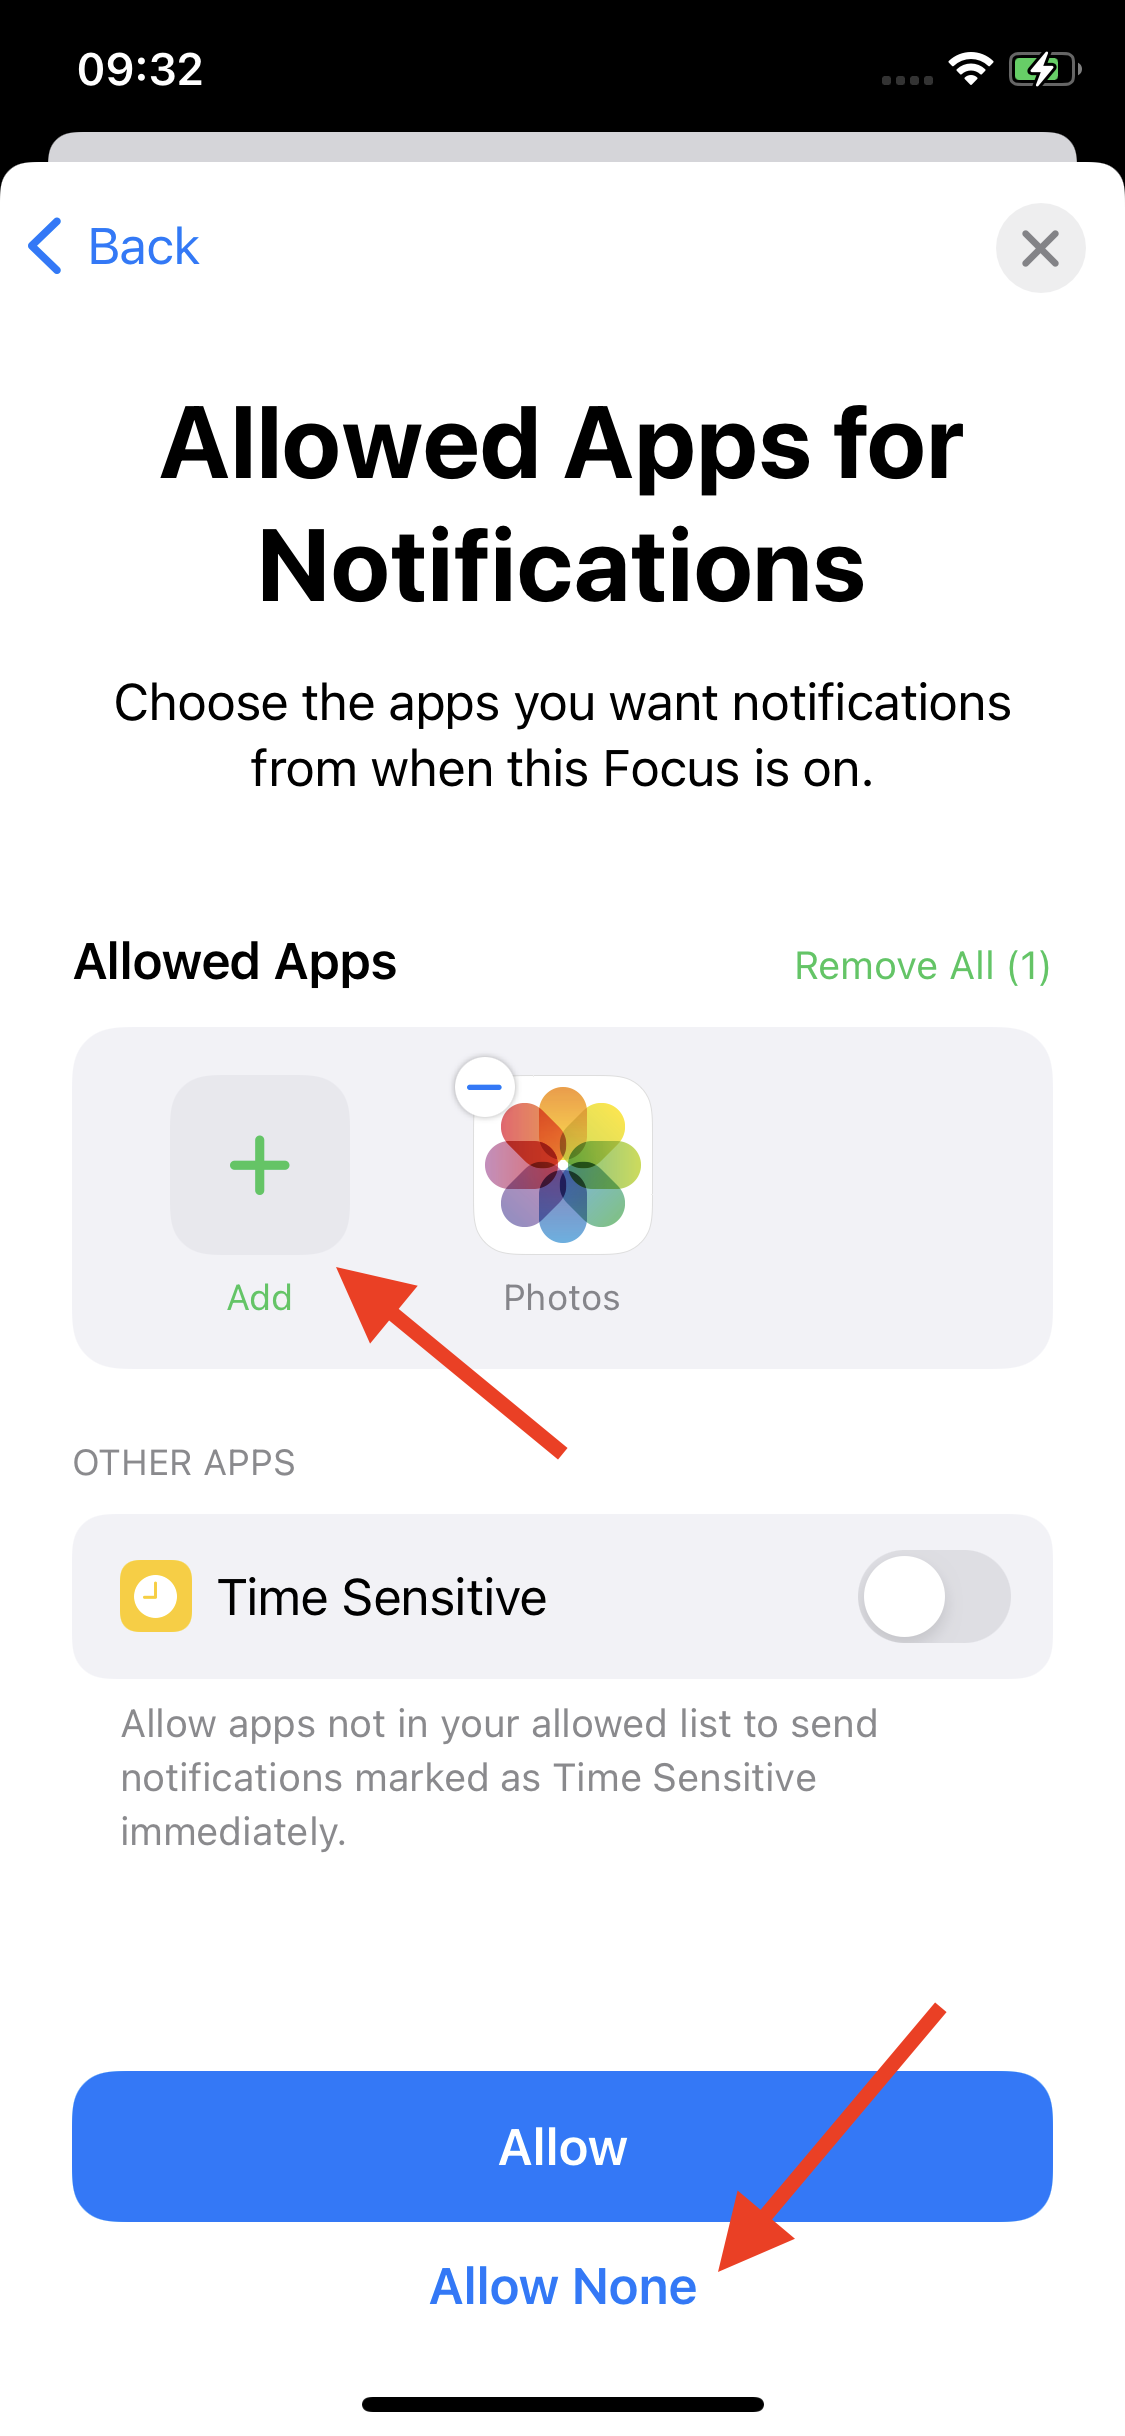 Allow selected apps or allow none